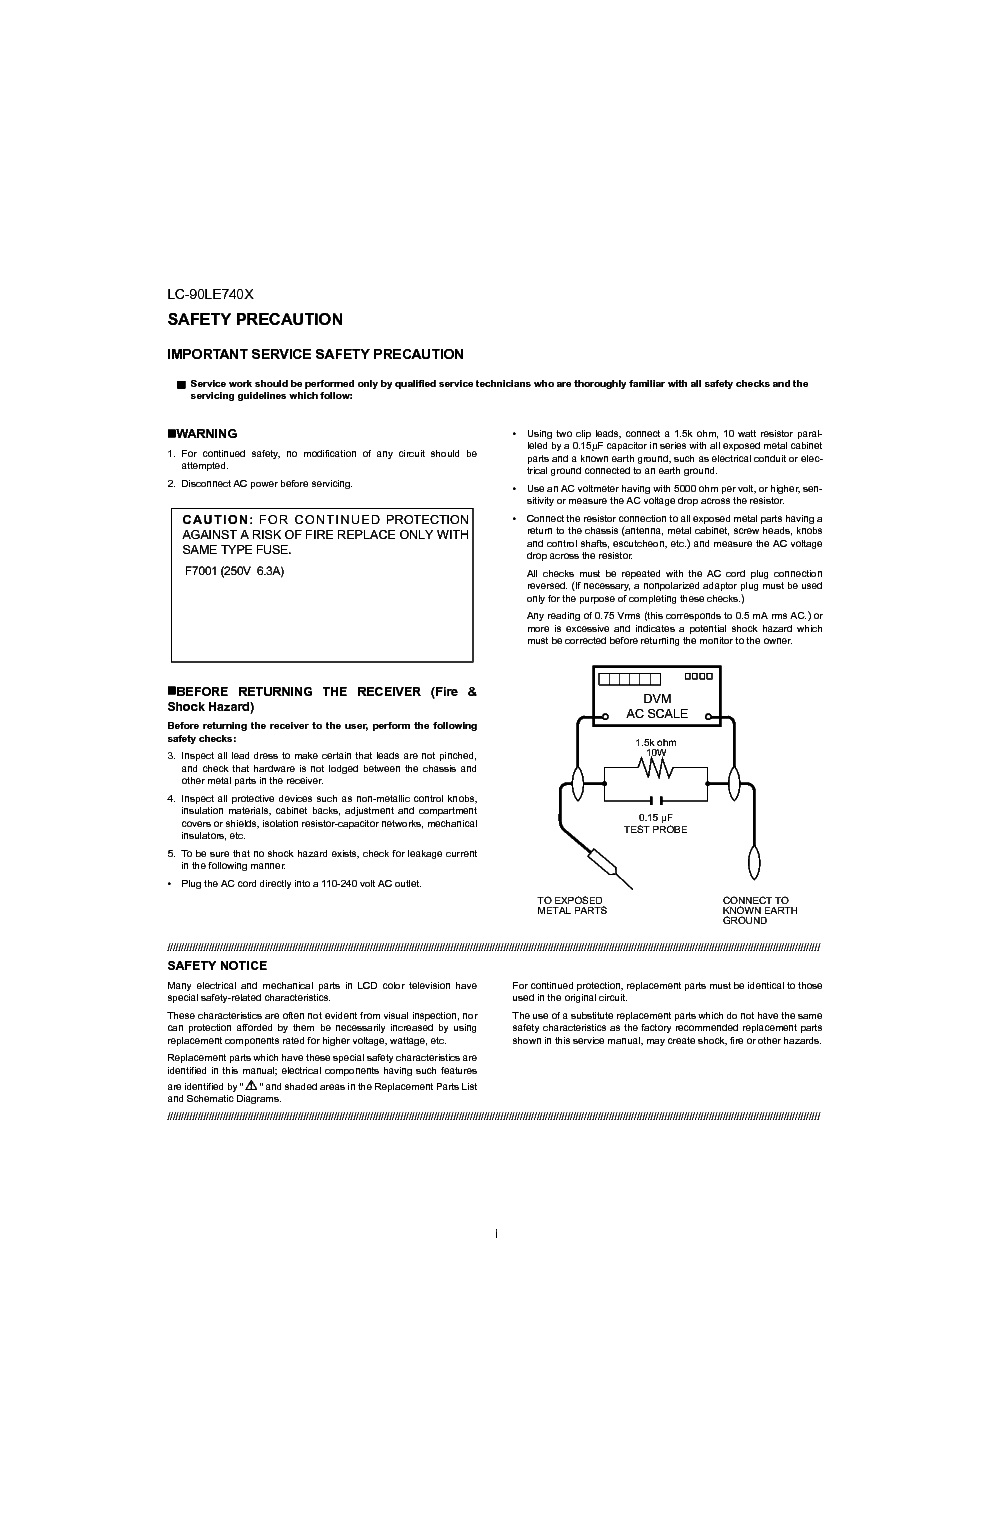 SHARP LC-90LE740X service manual (2nd page)